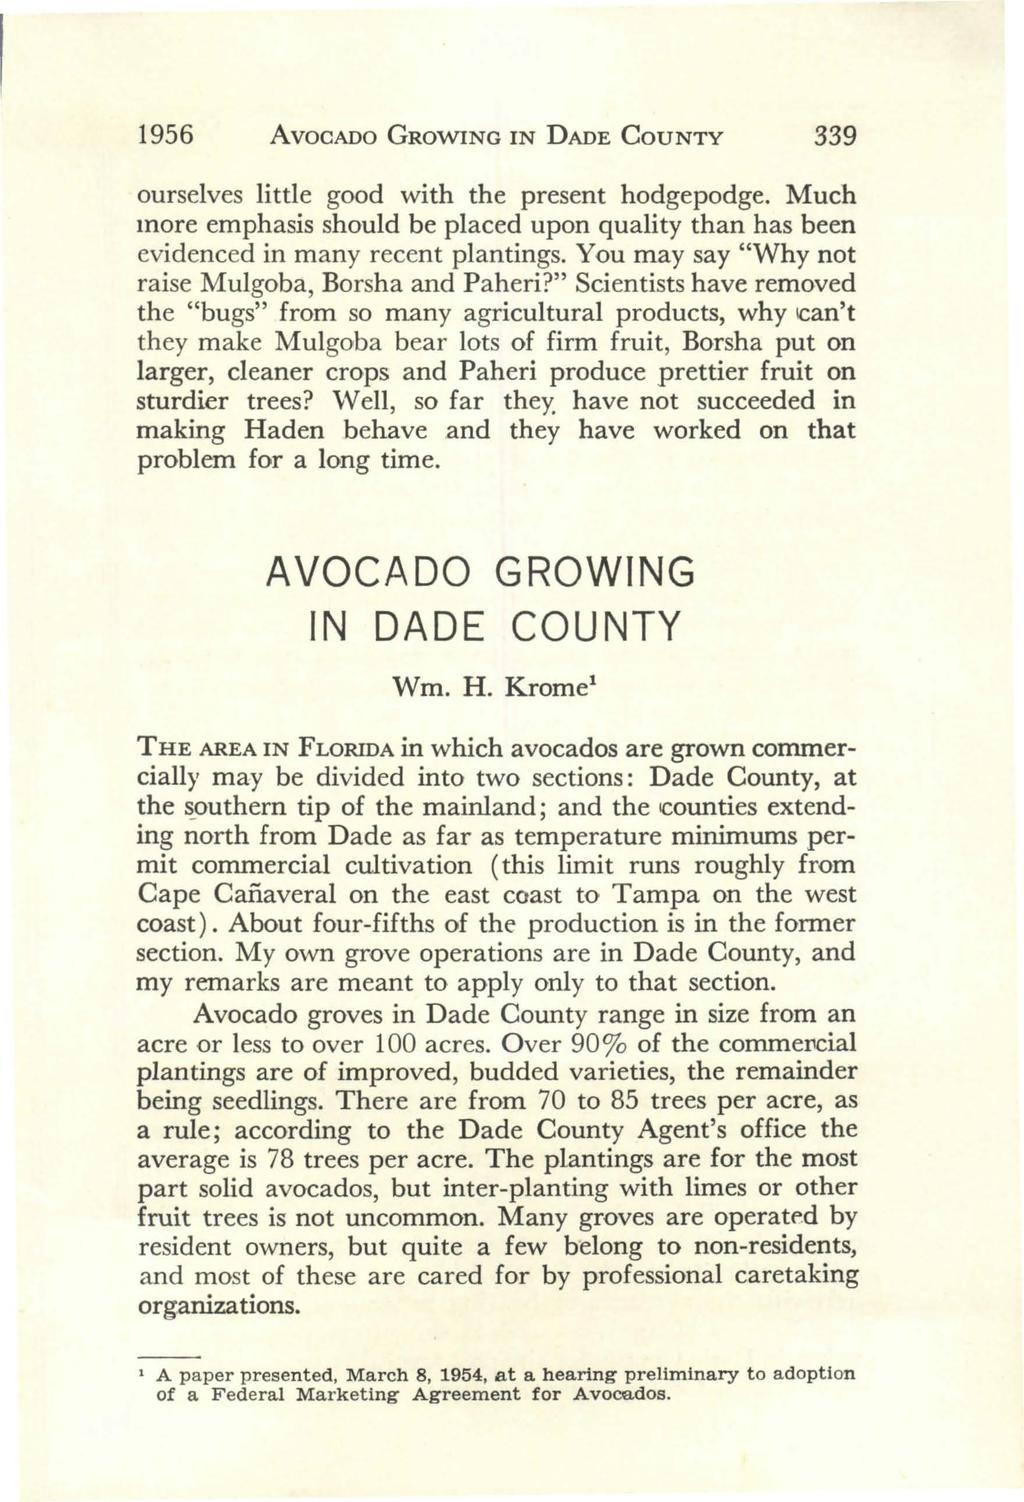 1956 AvocADo GROWING IN DADE CouNTY 339 ourselves little good with the present hodgepodge. Much more emphasis should be placed upon quality than has been evidenced in many recent plantings.